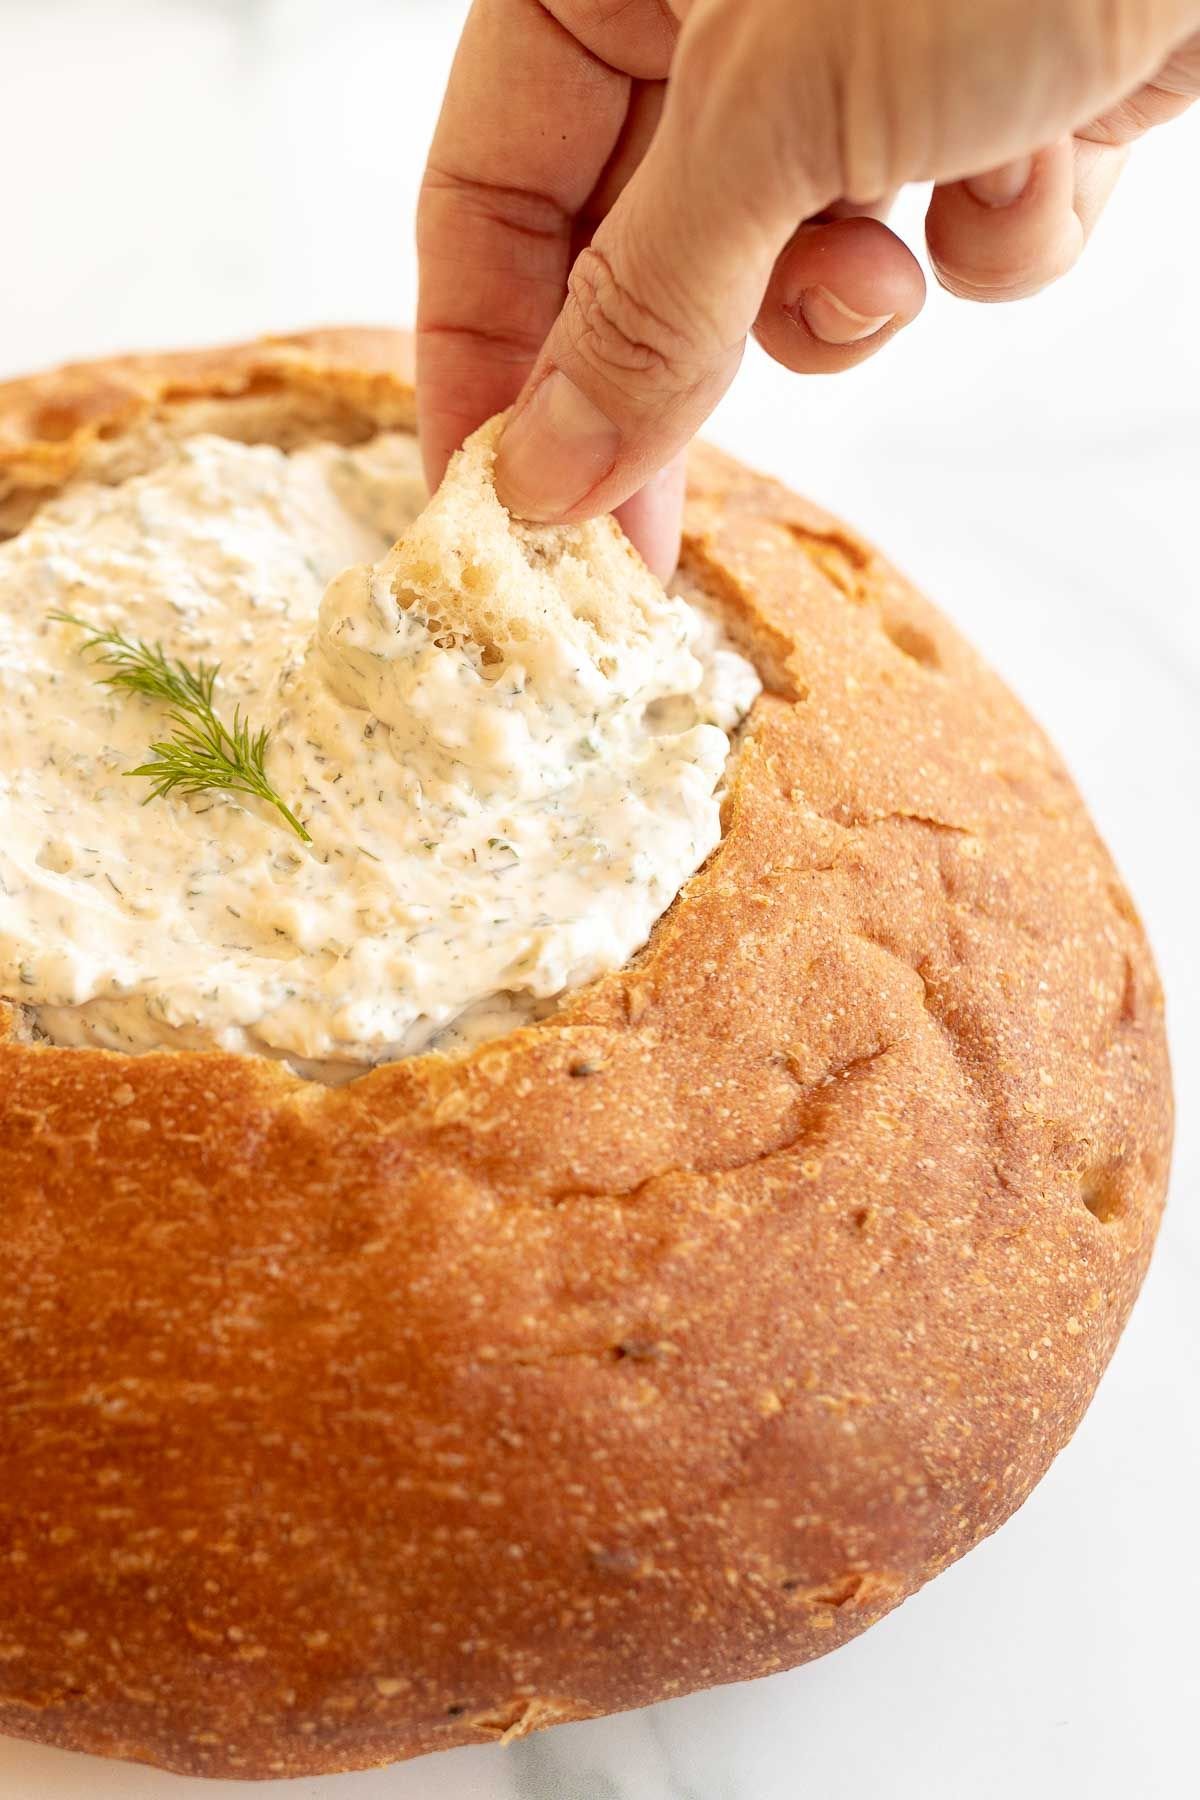 A hand dipping into a bread bowl full of dill dip